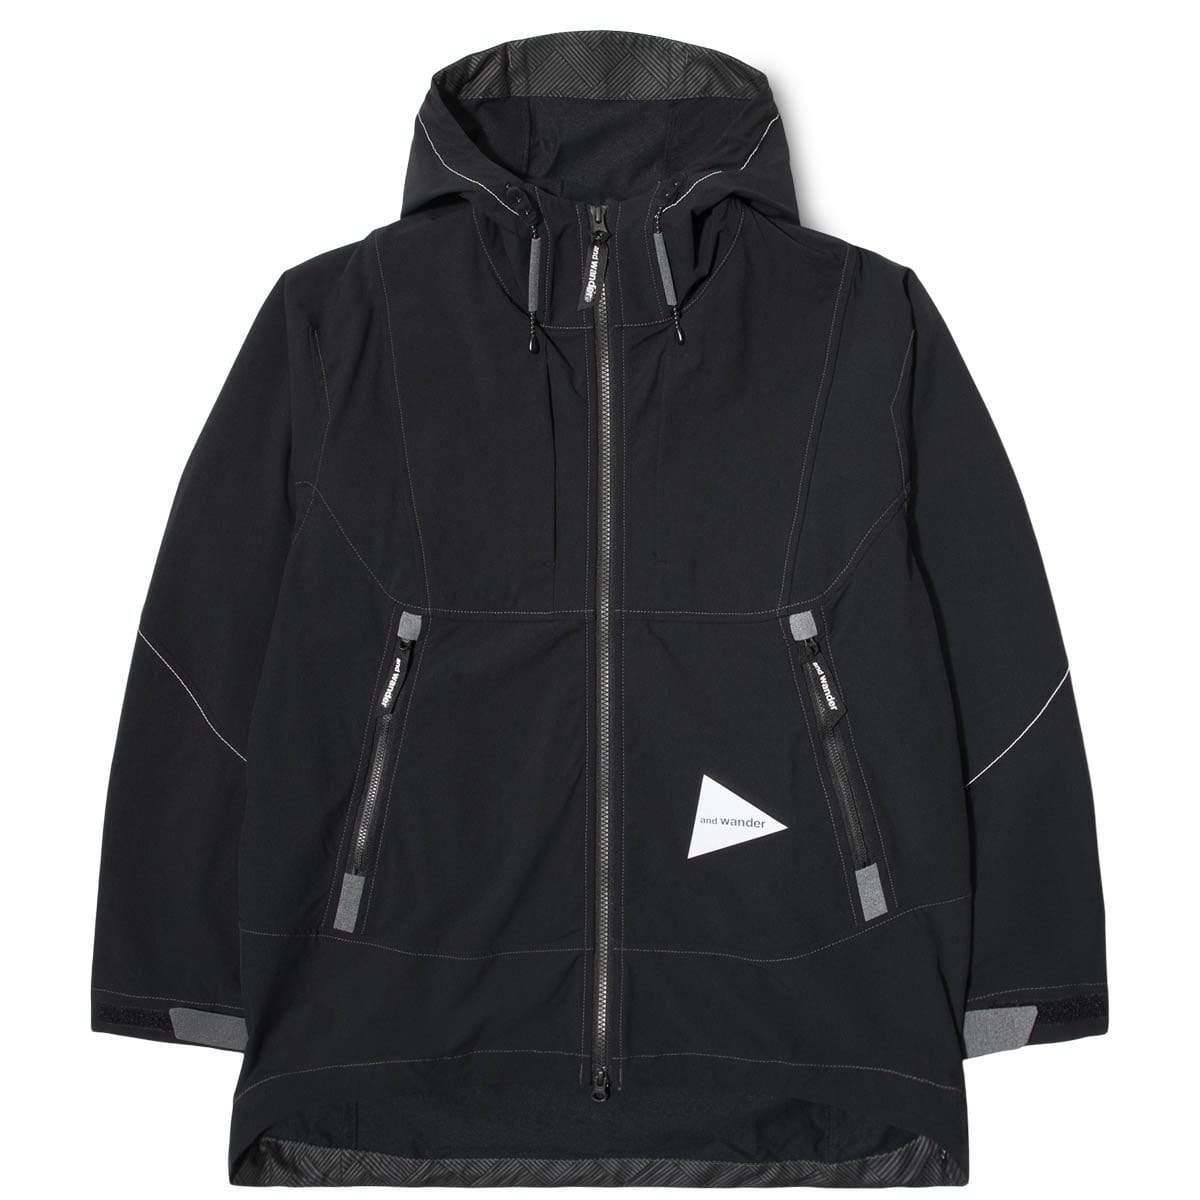 AND WANDER Logo-Print Schoeller® 3XDRY® Hooded Jacket for Men